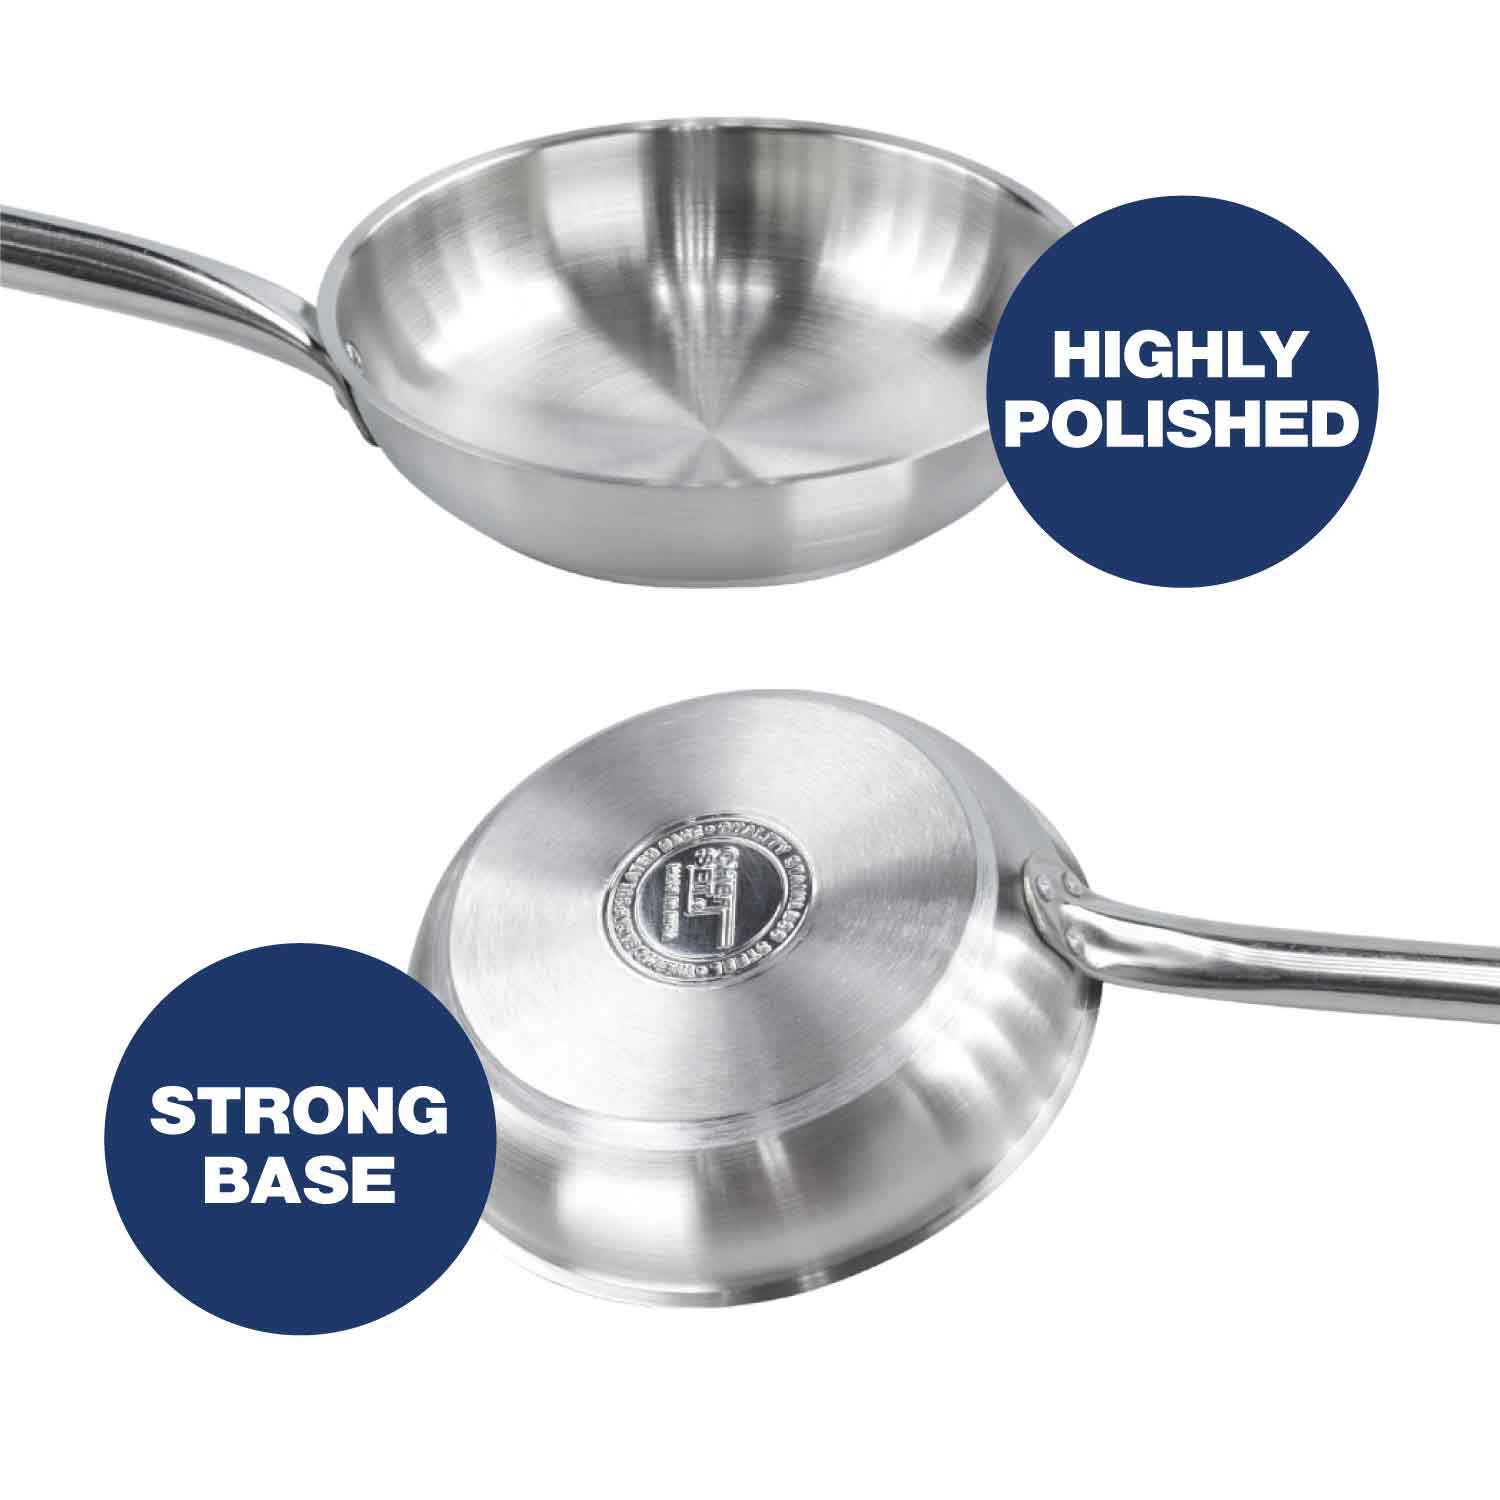 Chefset Stainless Steel Fry Pan Set of 2